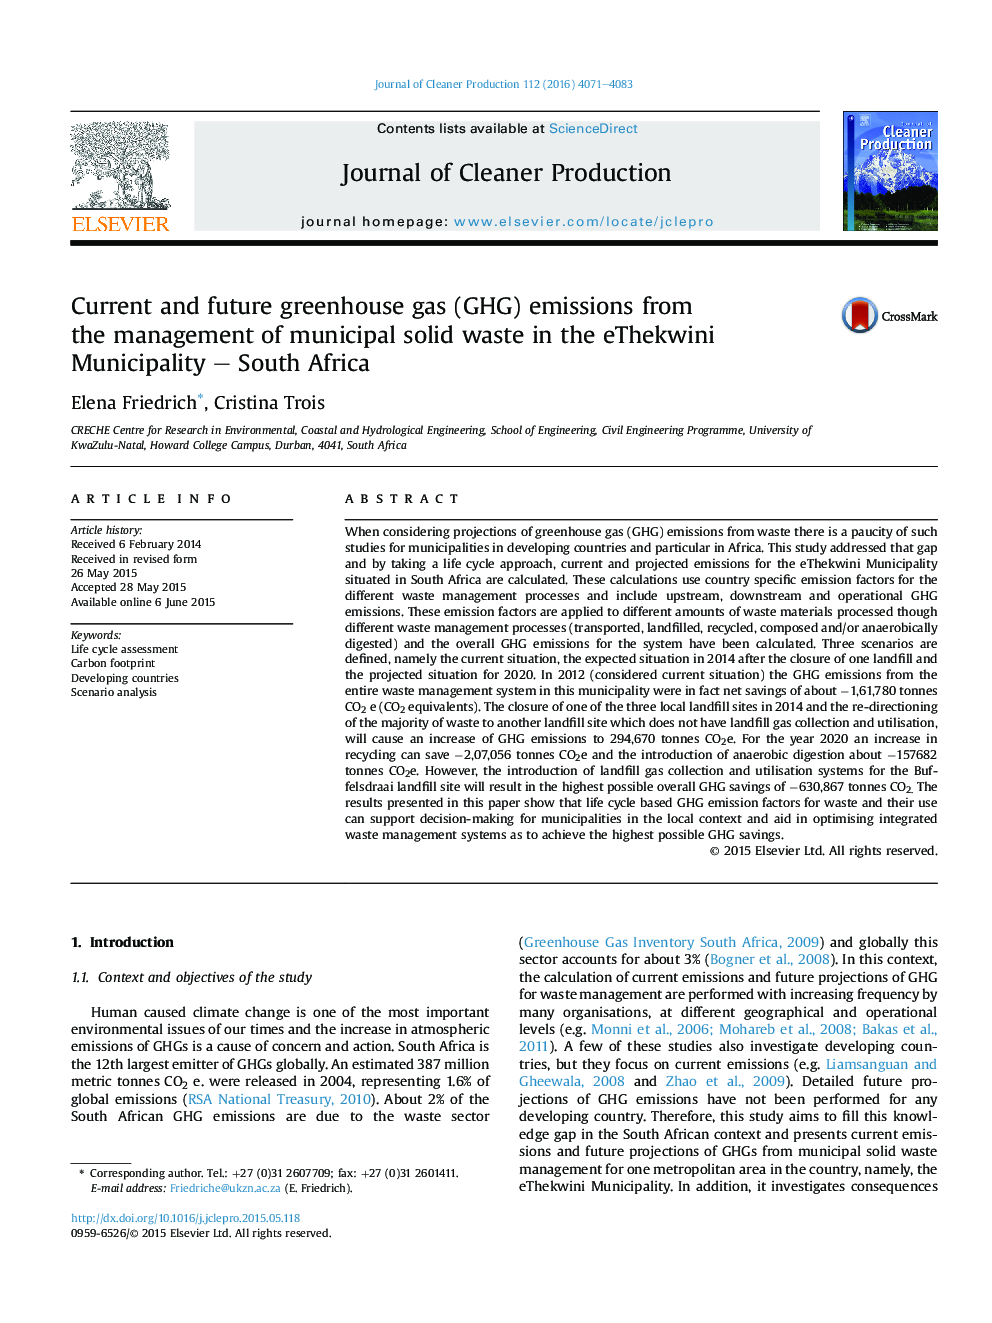 Current and future greenhouse gas (GHG) emissions from theÂ management of municipal solid waste in the eThekwini Municipality - South Africa